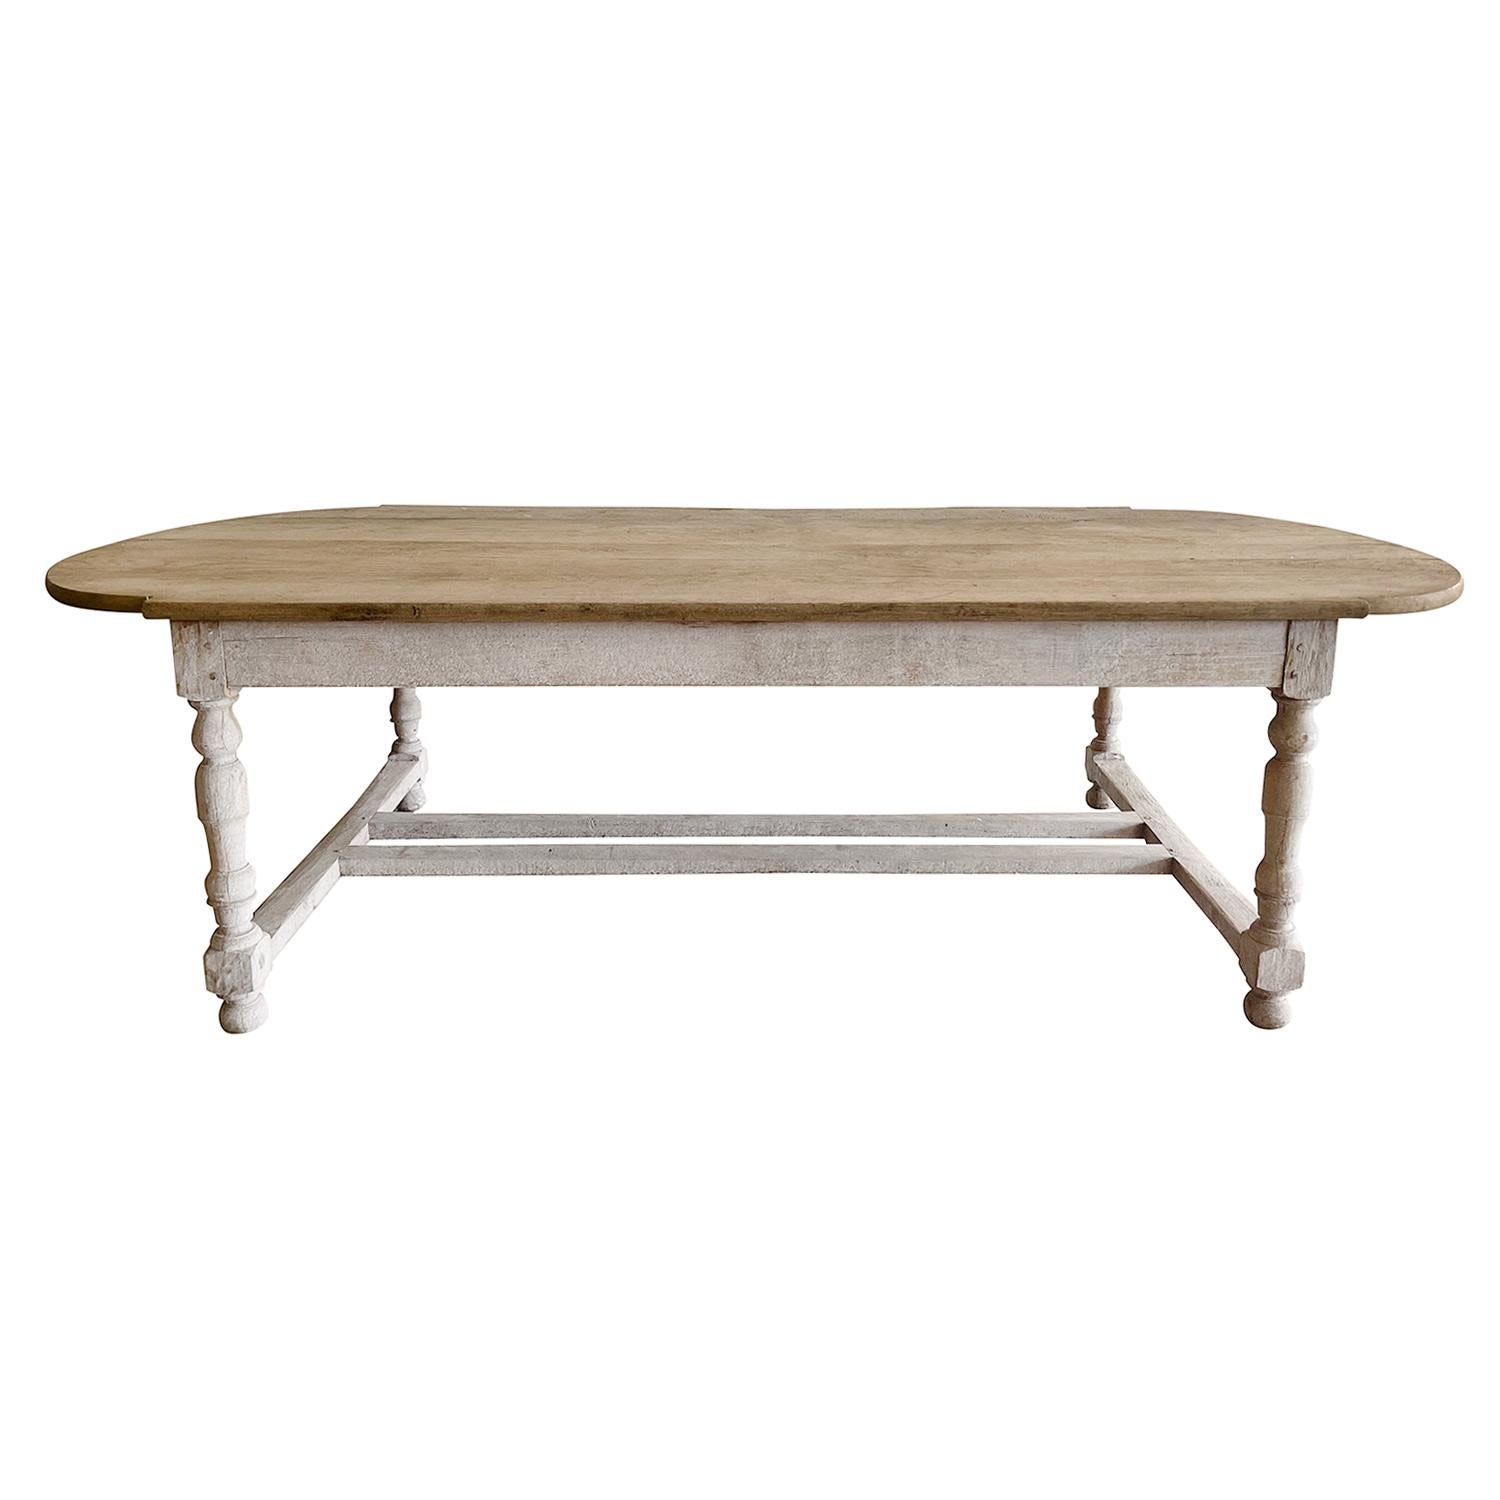 Late 19th century rustic French farmhouse table has an unusual design with center and side stretchers in Beechwood with a white wash finish, in good condition. The table top was hand made using thick planks and the head of the table is of oval